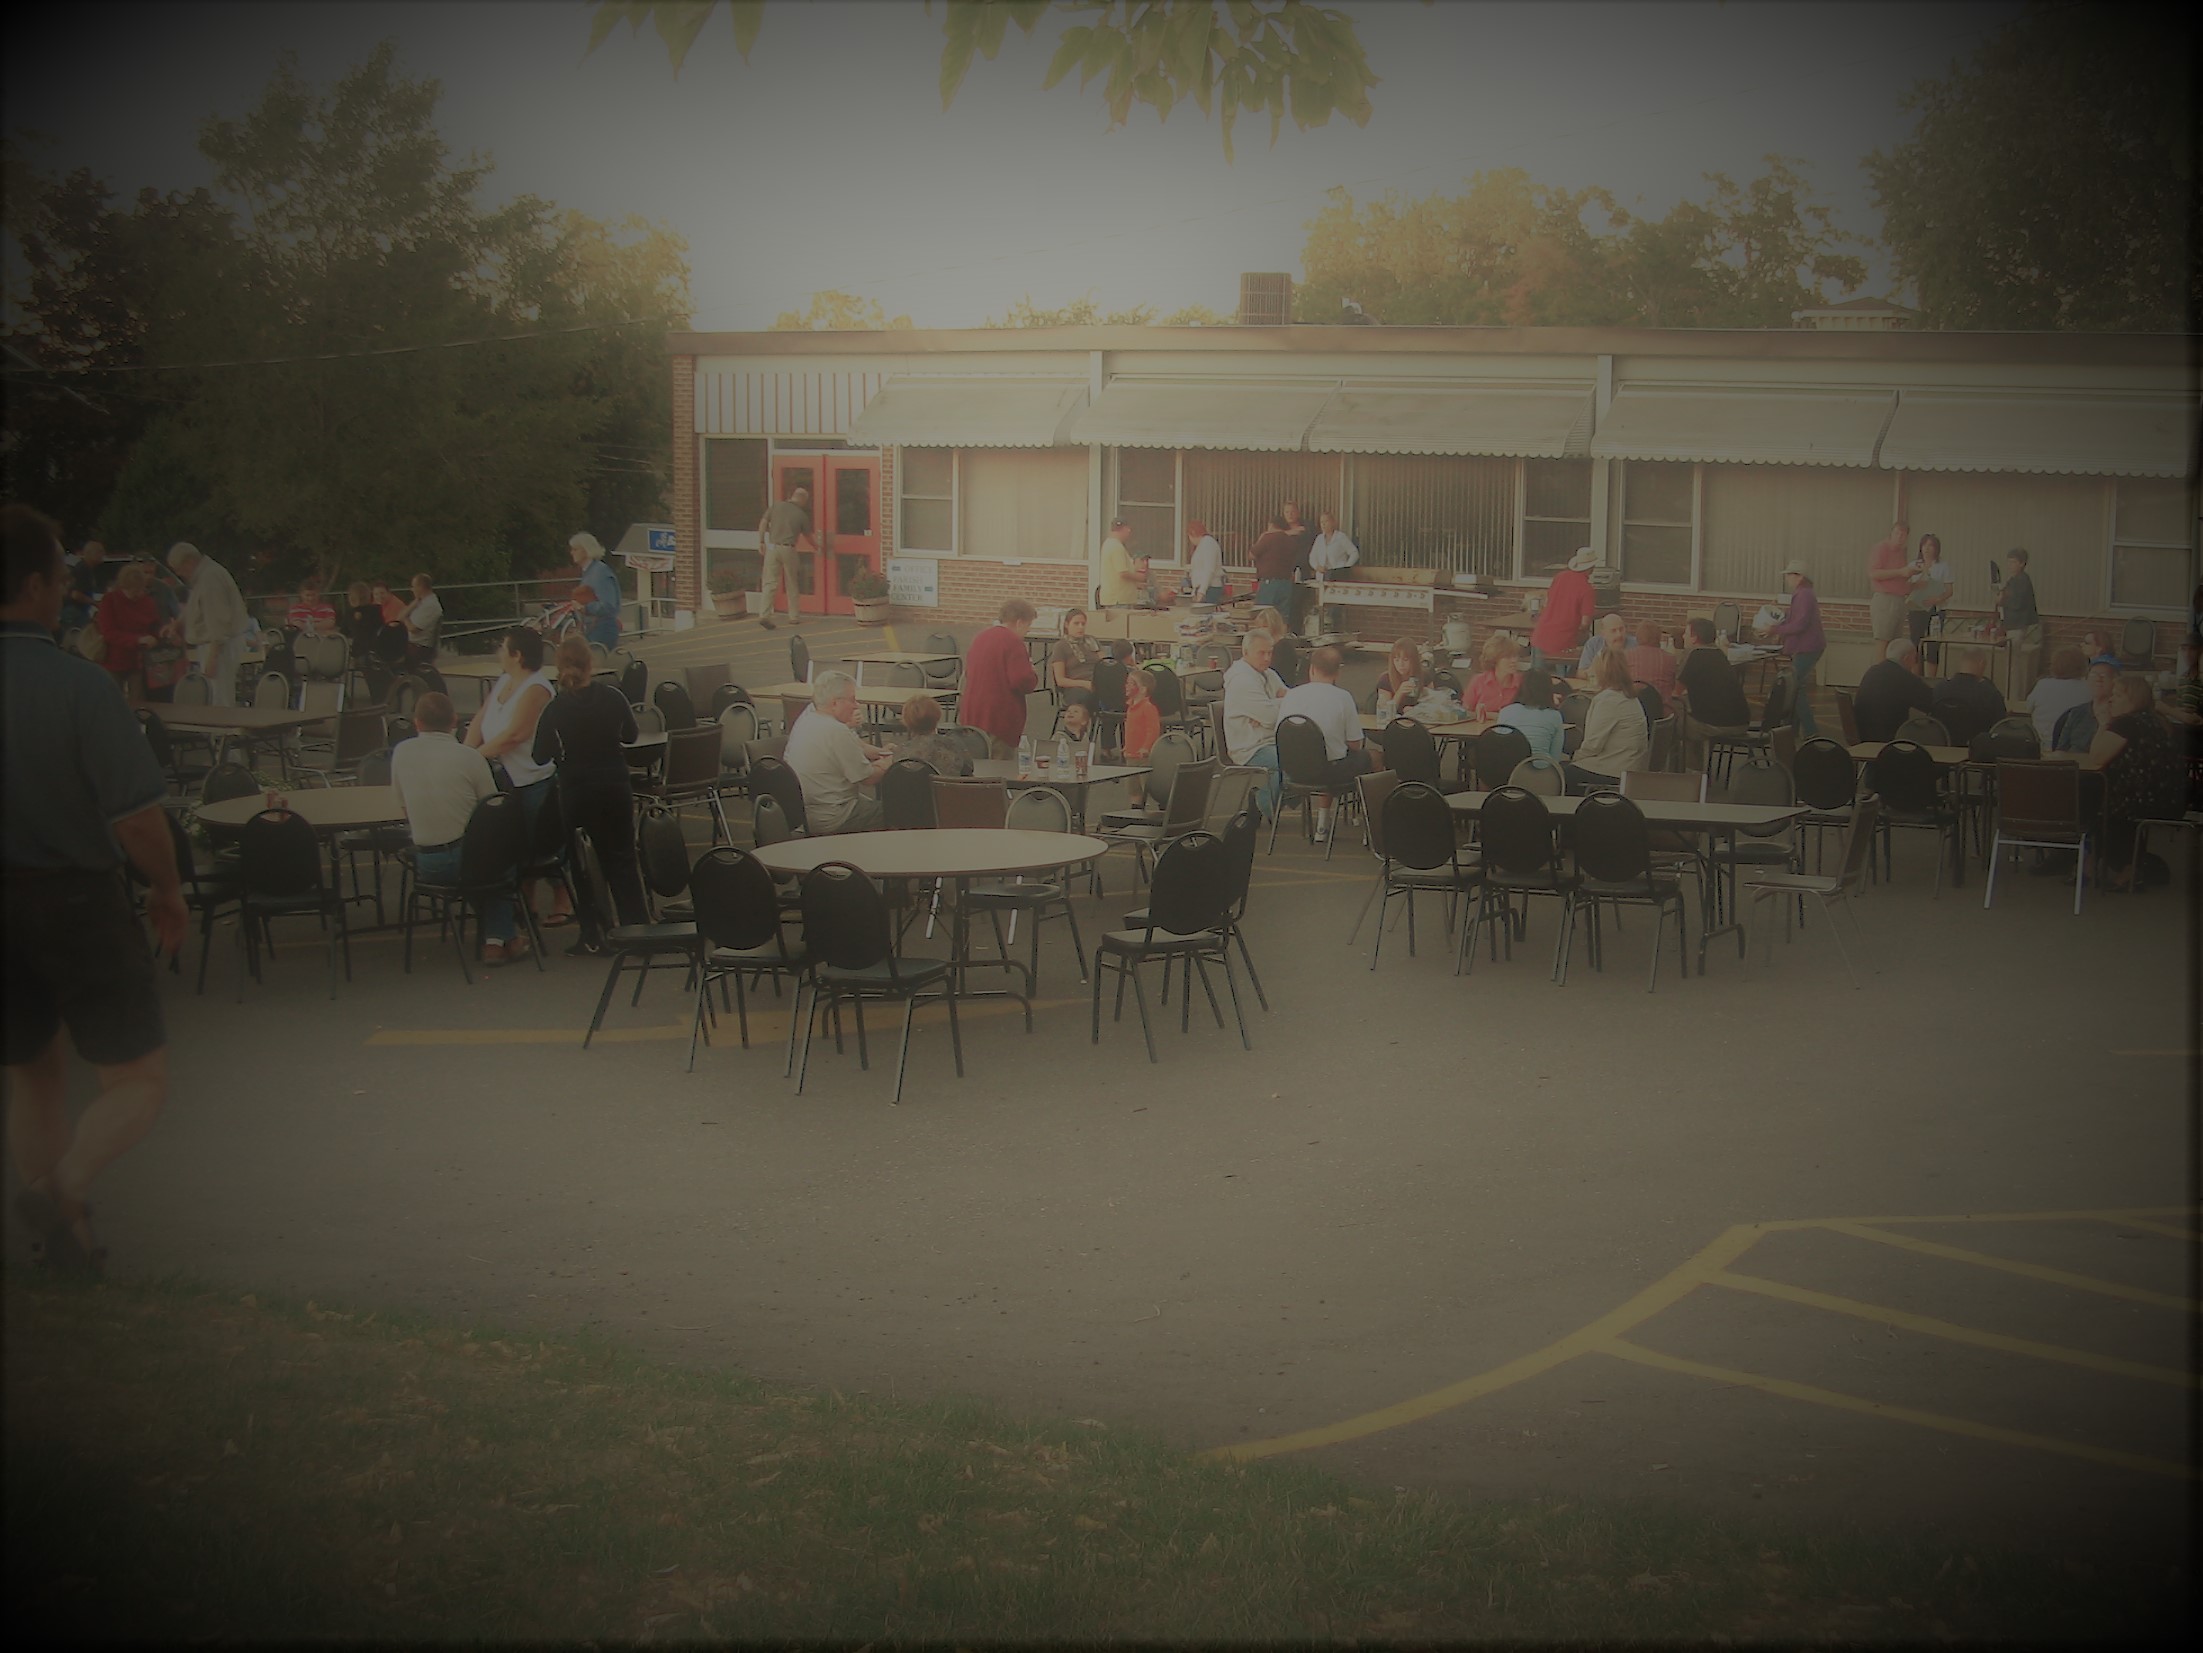 An outdoor social gathering of parishioners on the parish office parking lot